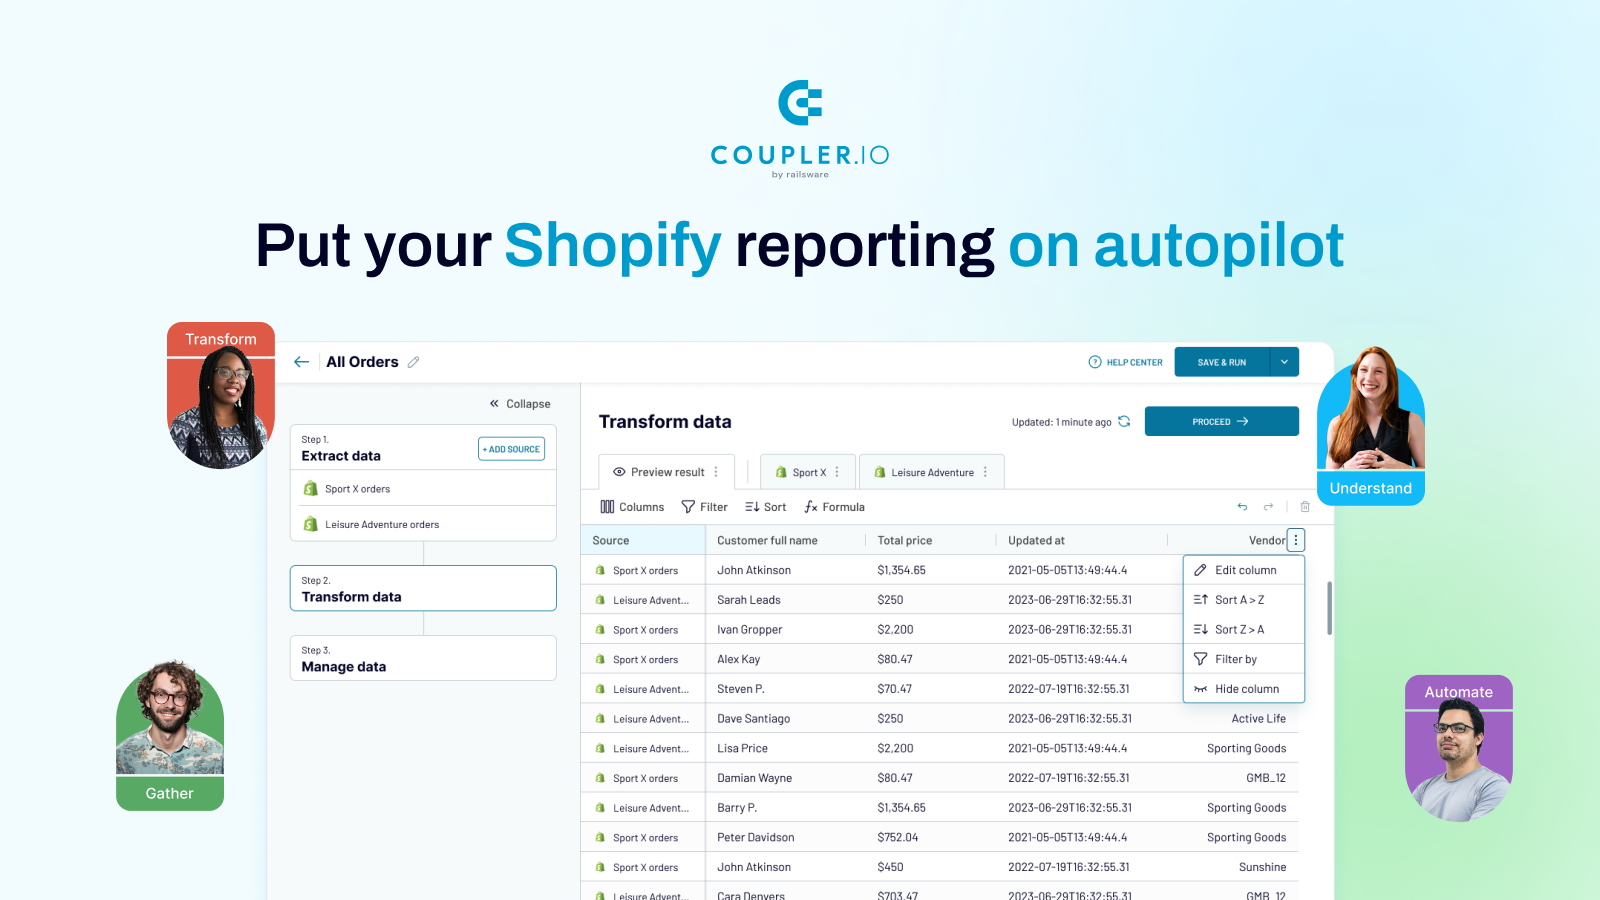 Put your Shopify reporting on autopilot